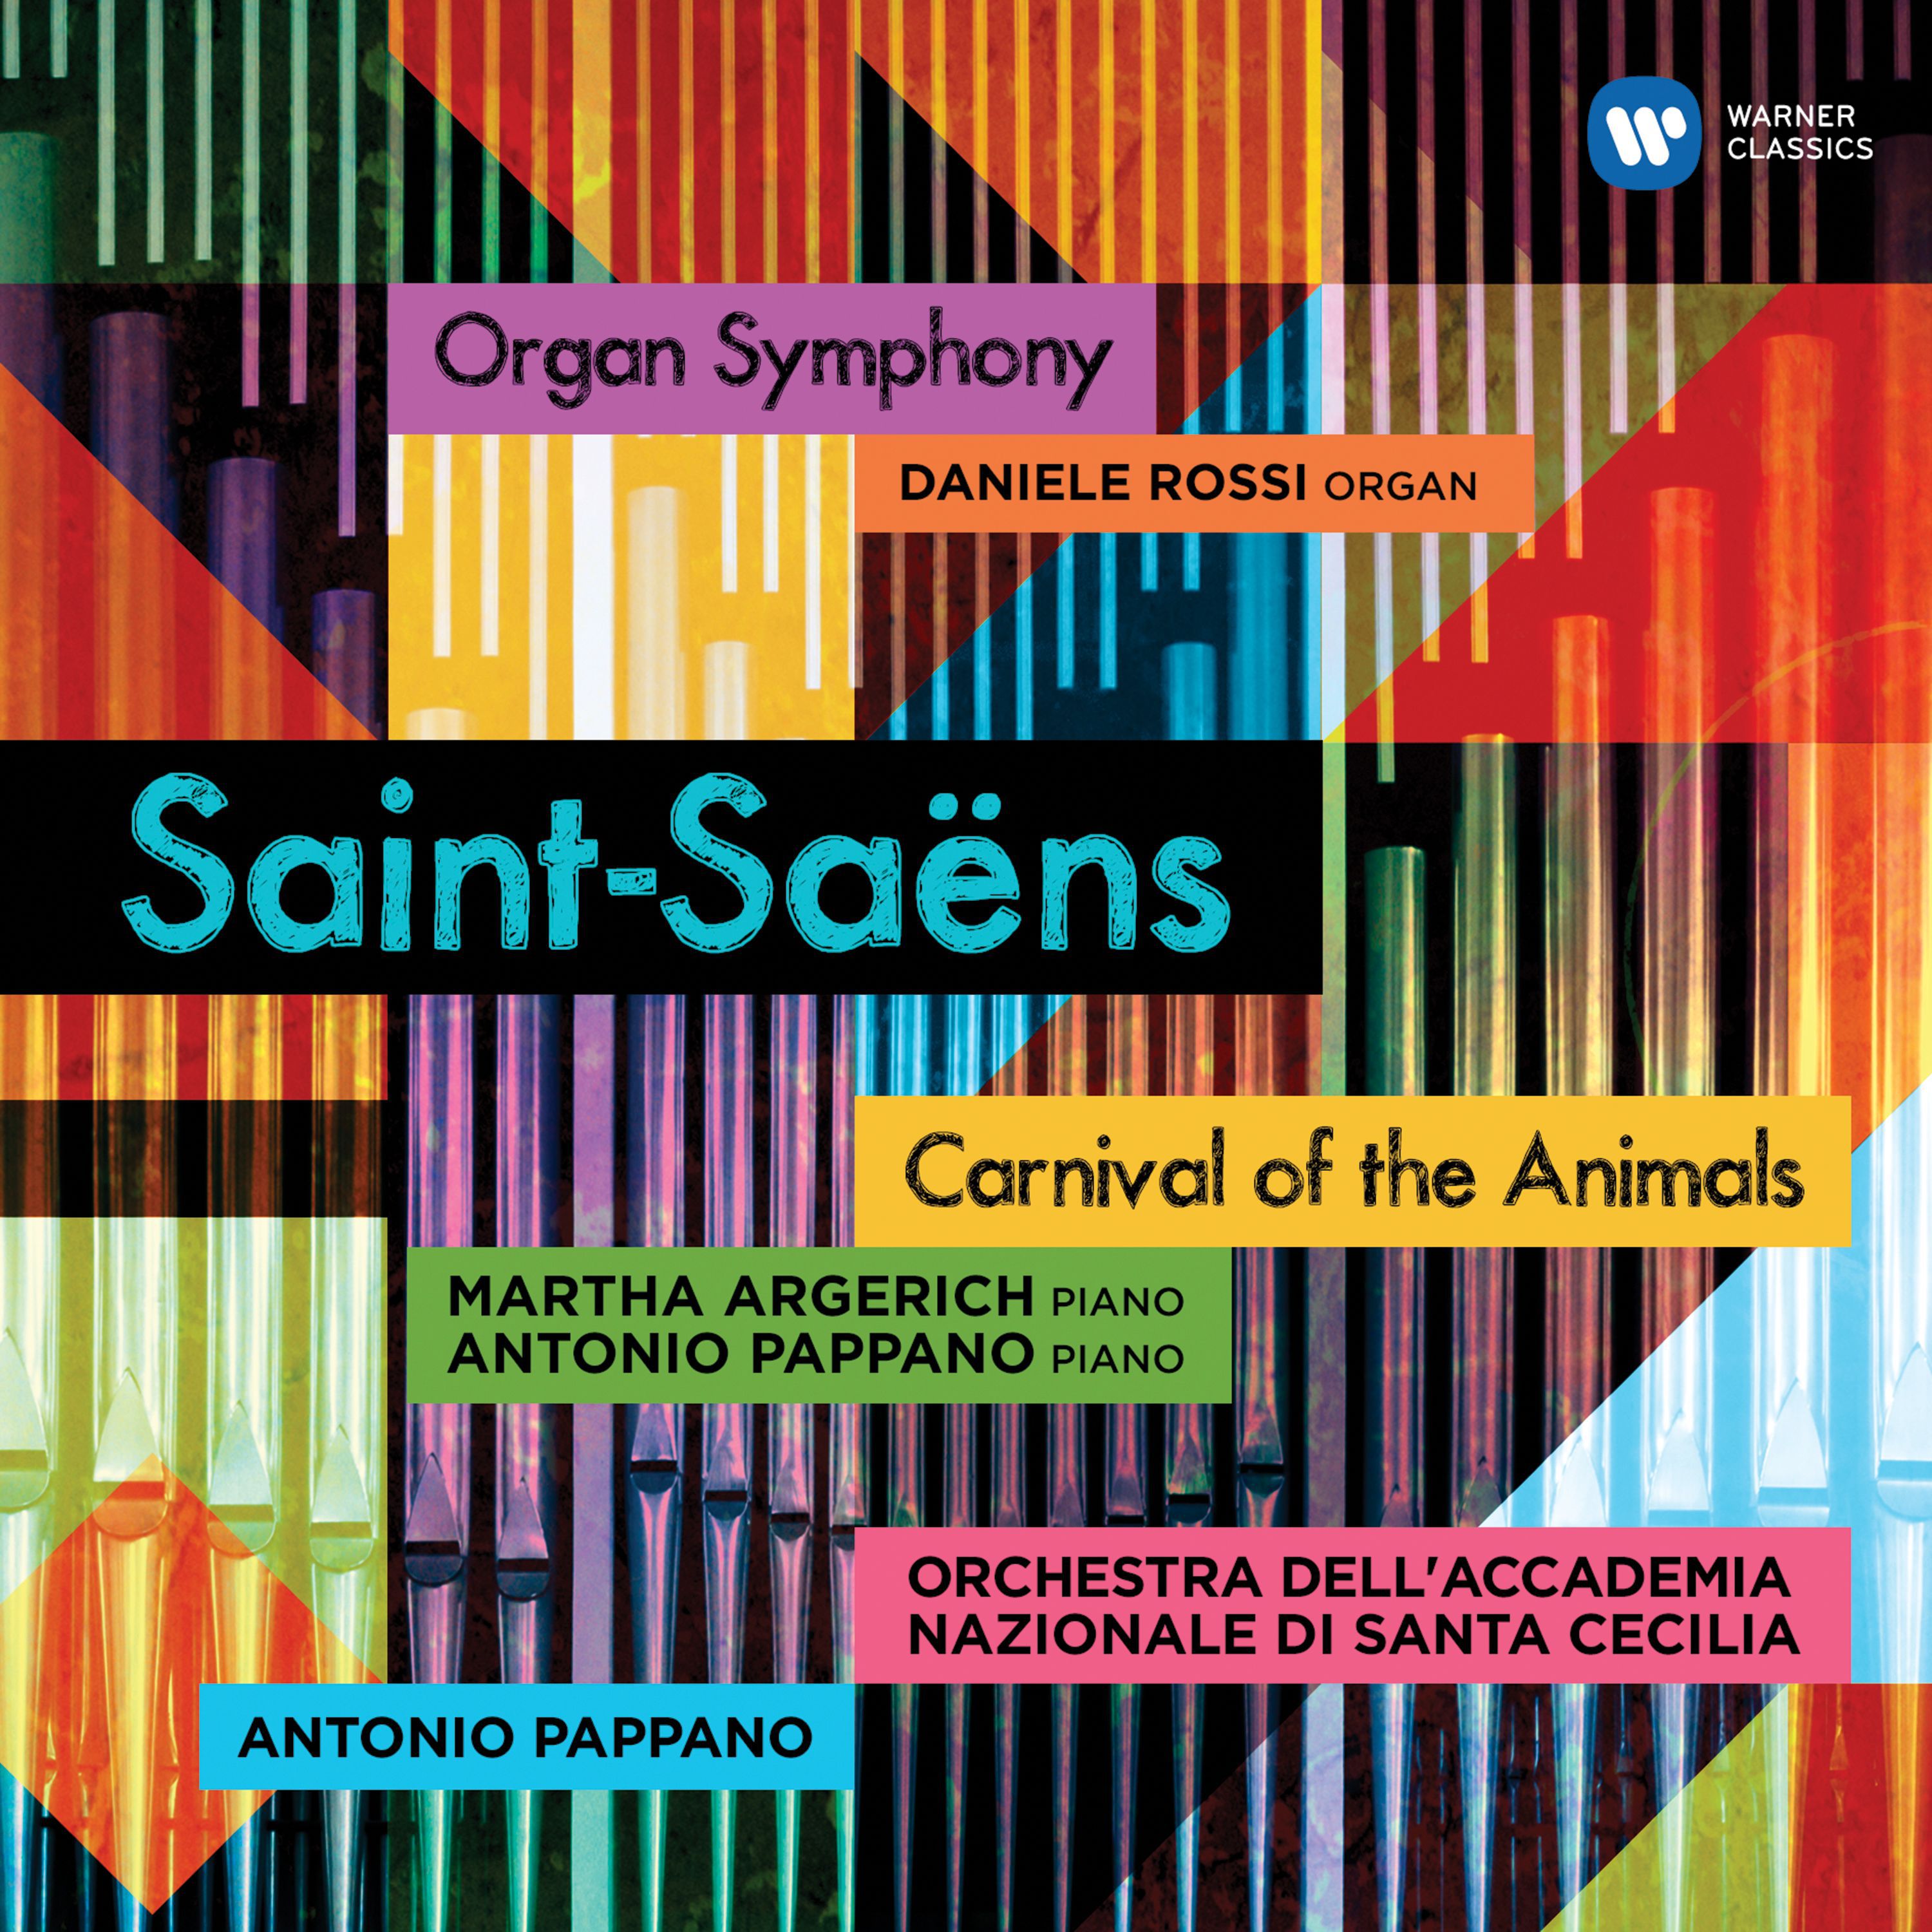 Saint-Saens Organ Symphony, Carnival of the Animals - Rossi, Argerich, Pappano